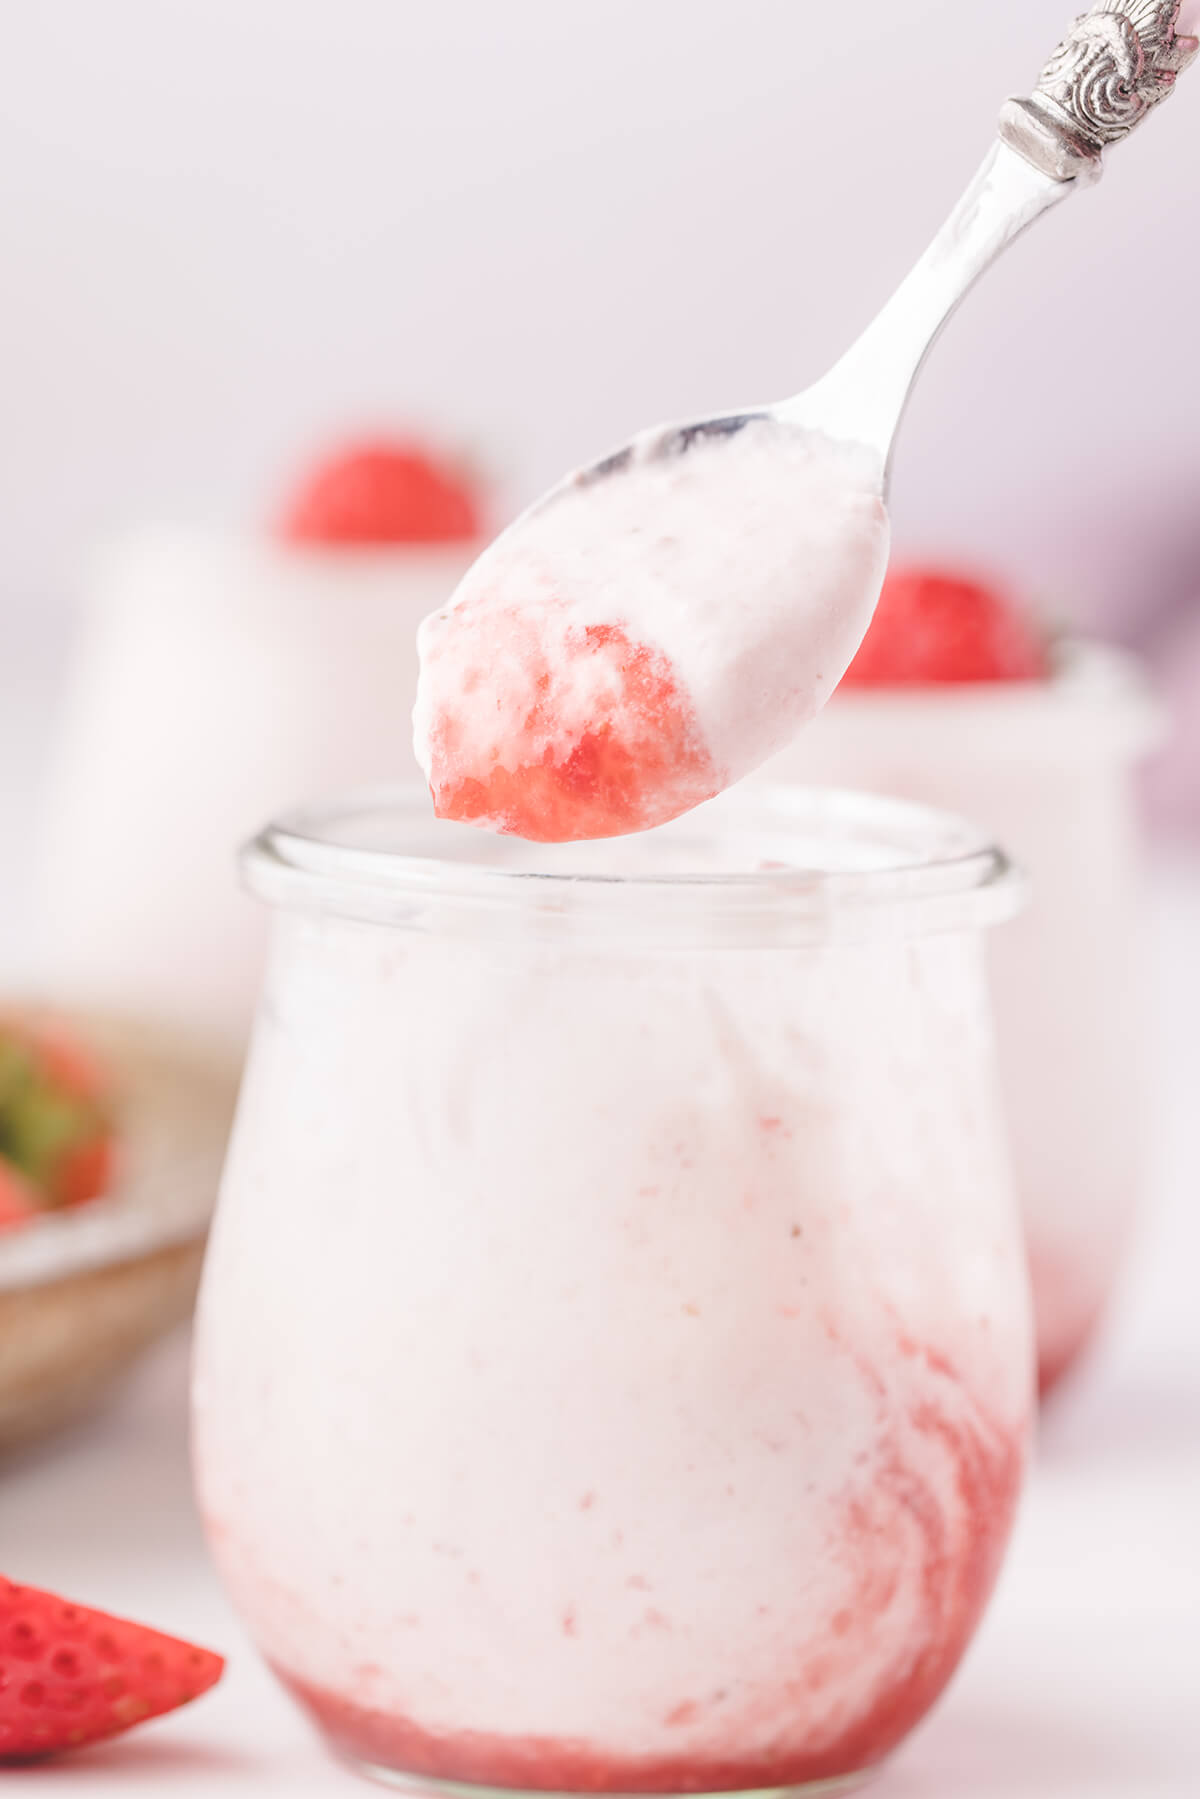 a spoon full of strawberry mousse showing the light fluffy texture